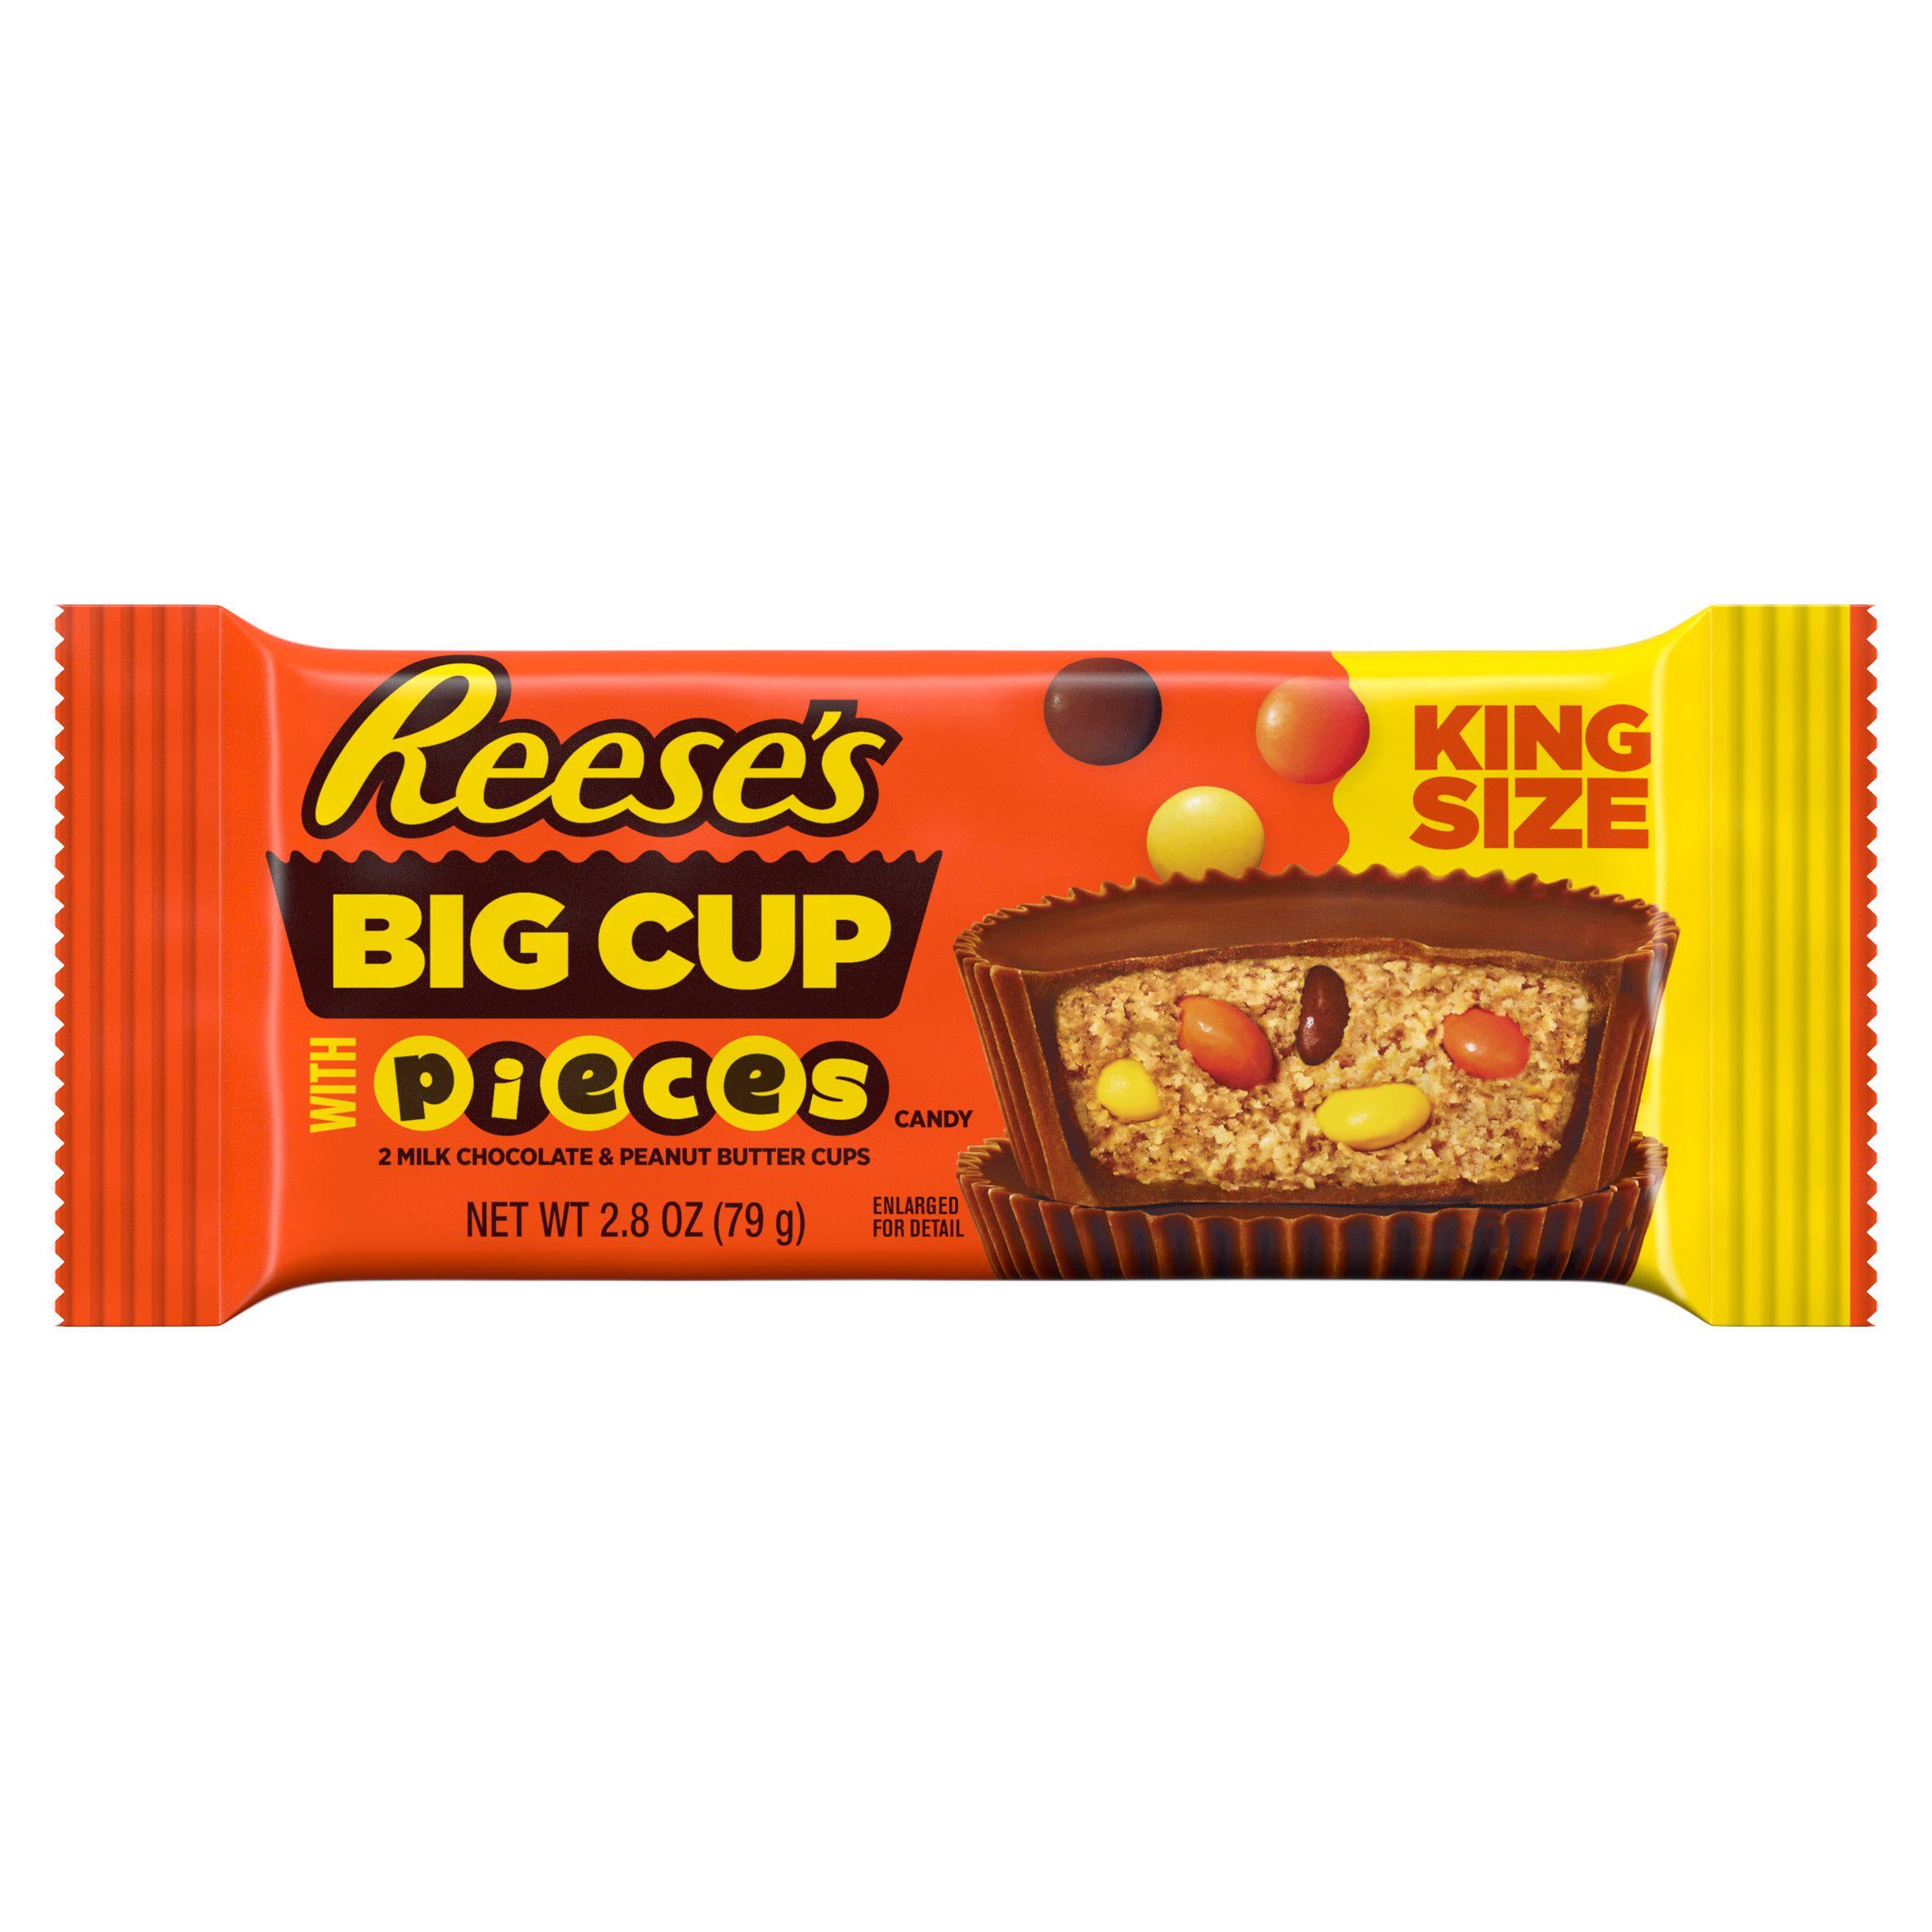 Reese's Big Cup with Pieces Candy - New